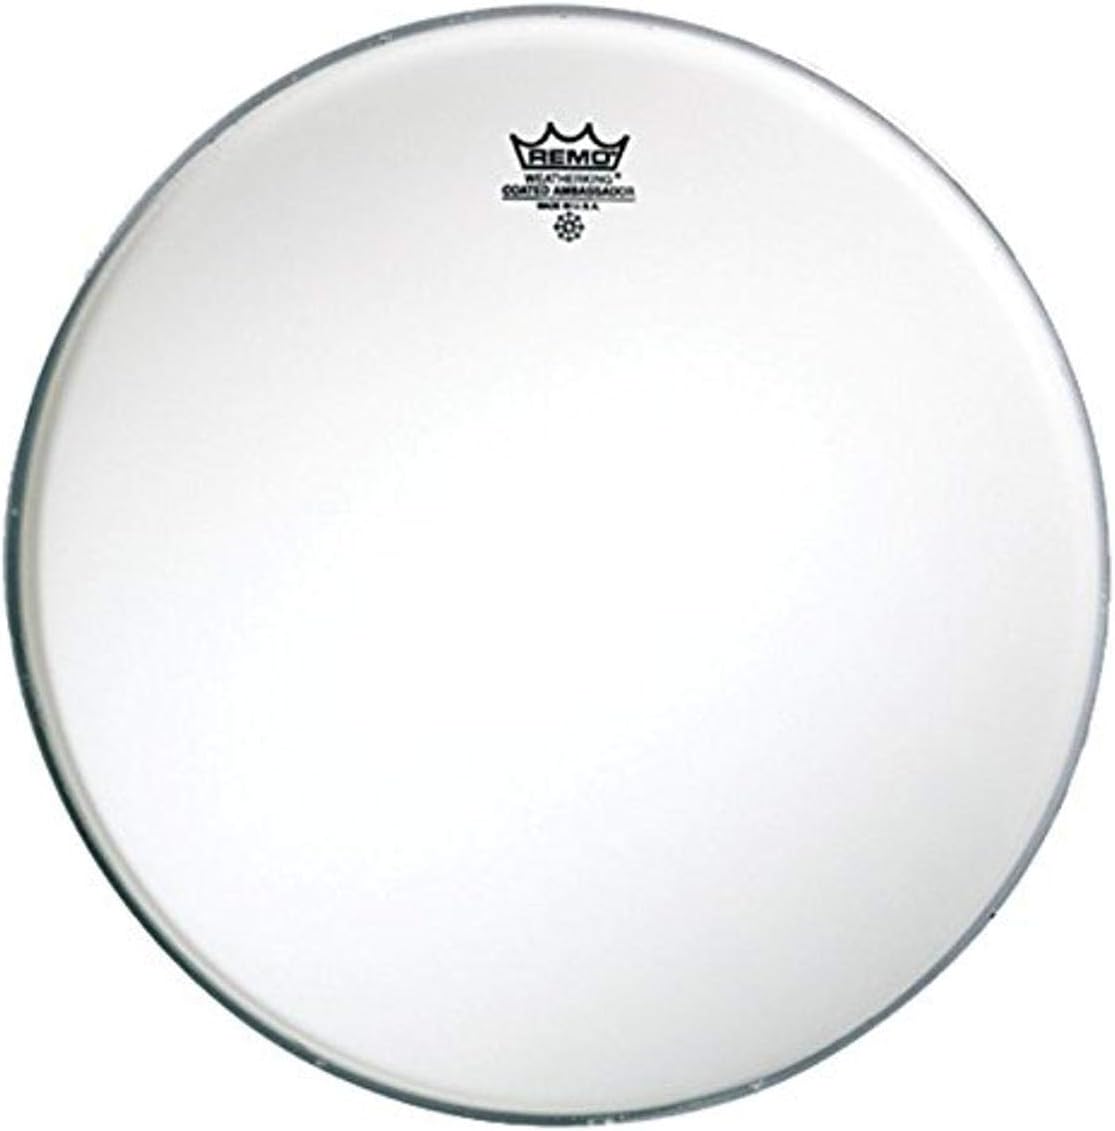 Remo BD-0114-00, Batter, Diplomat, Coated, Drum Head, 14 inch